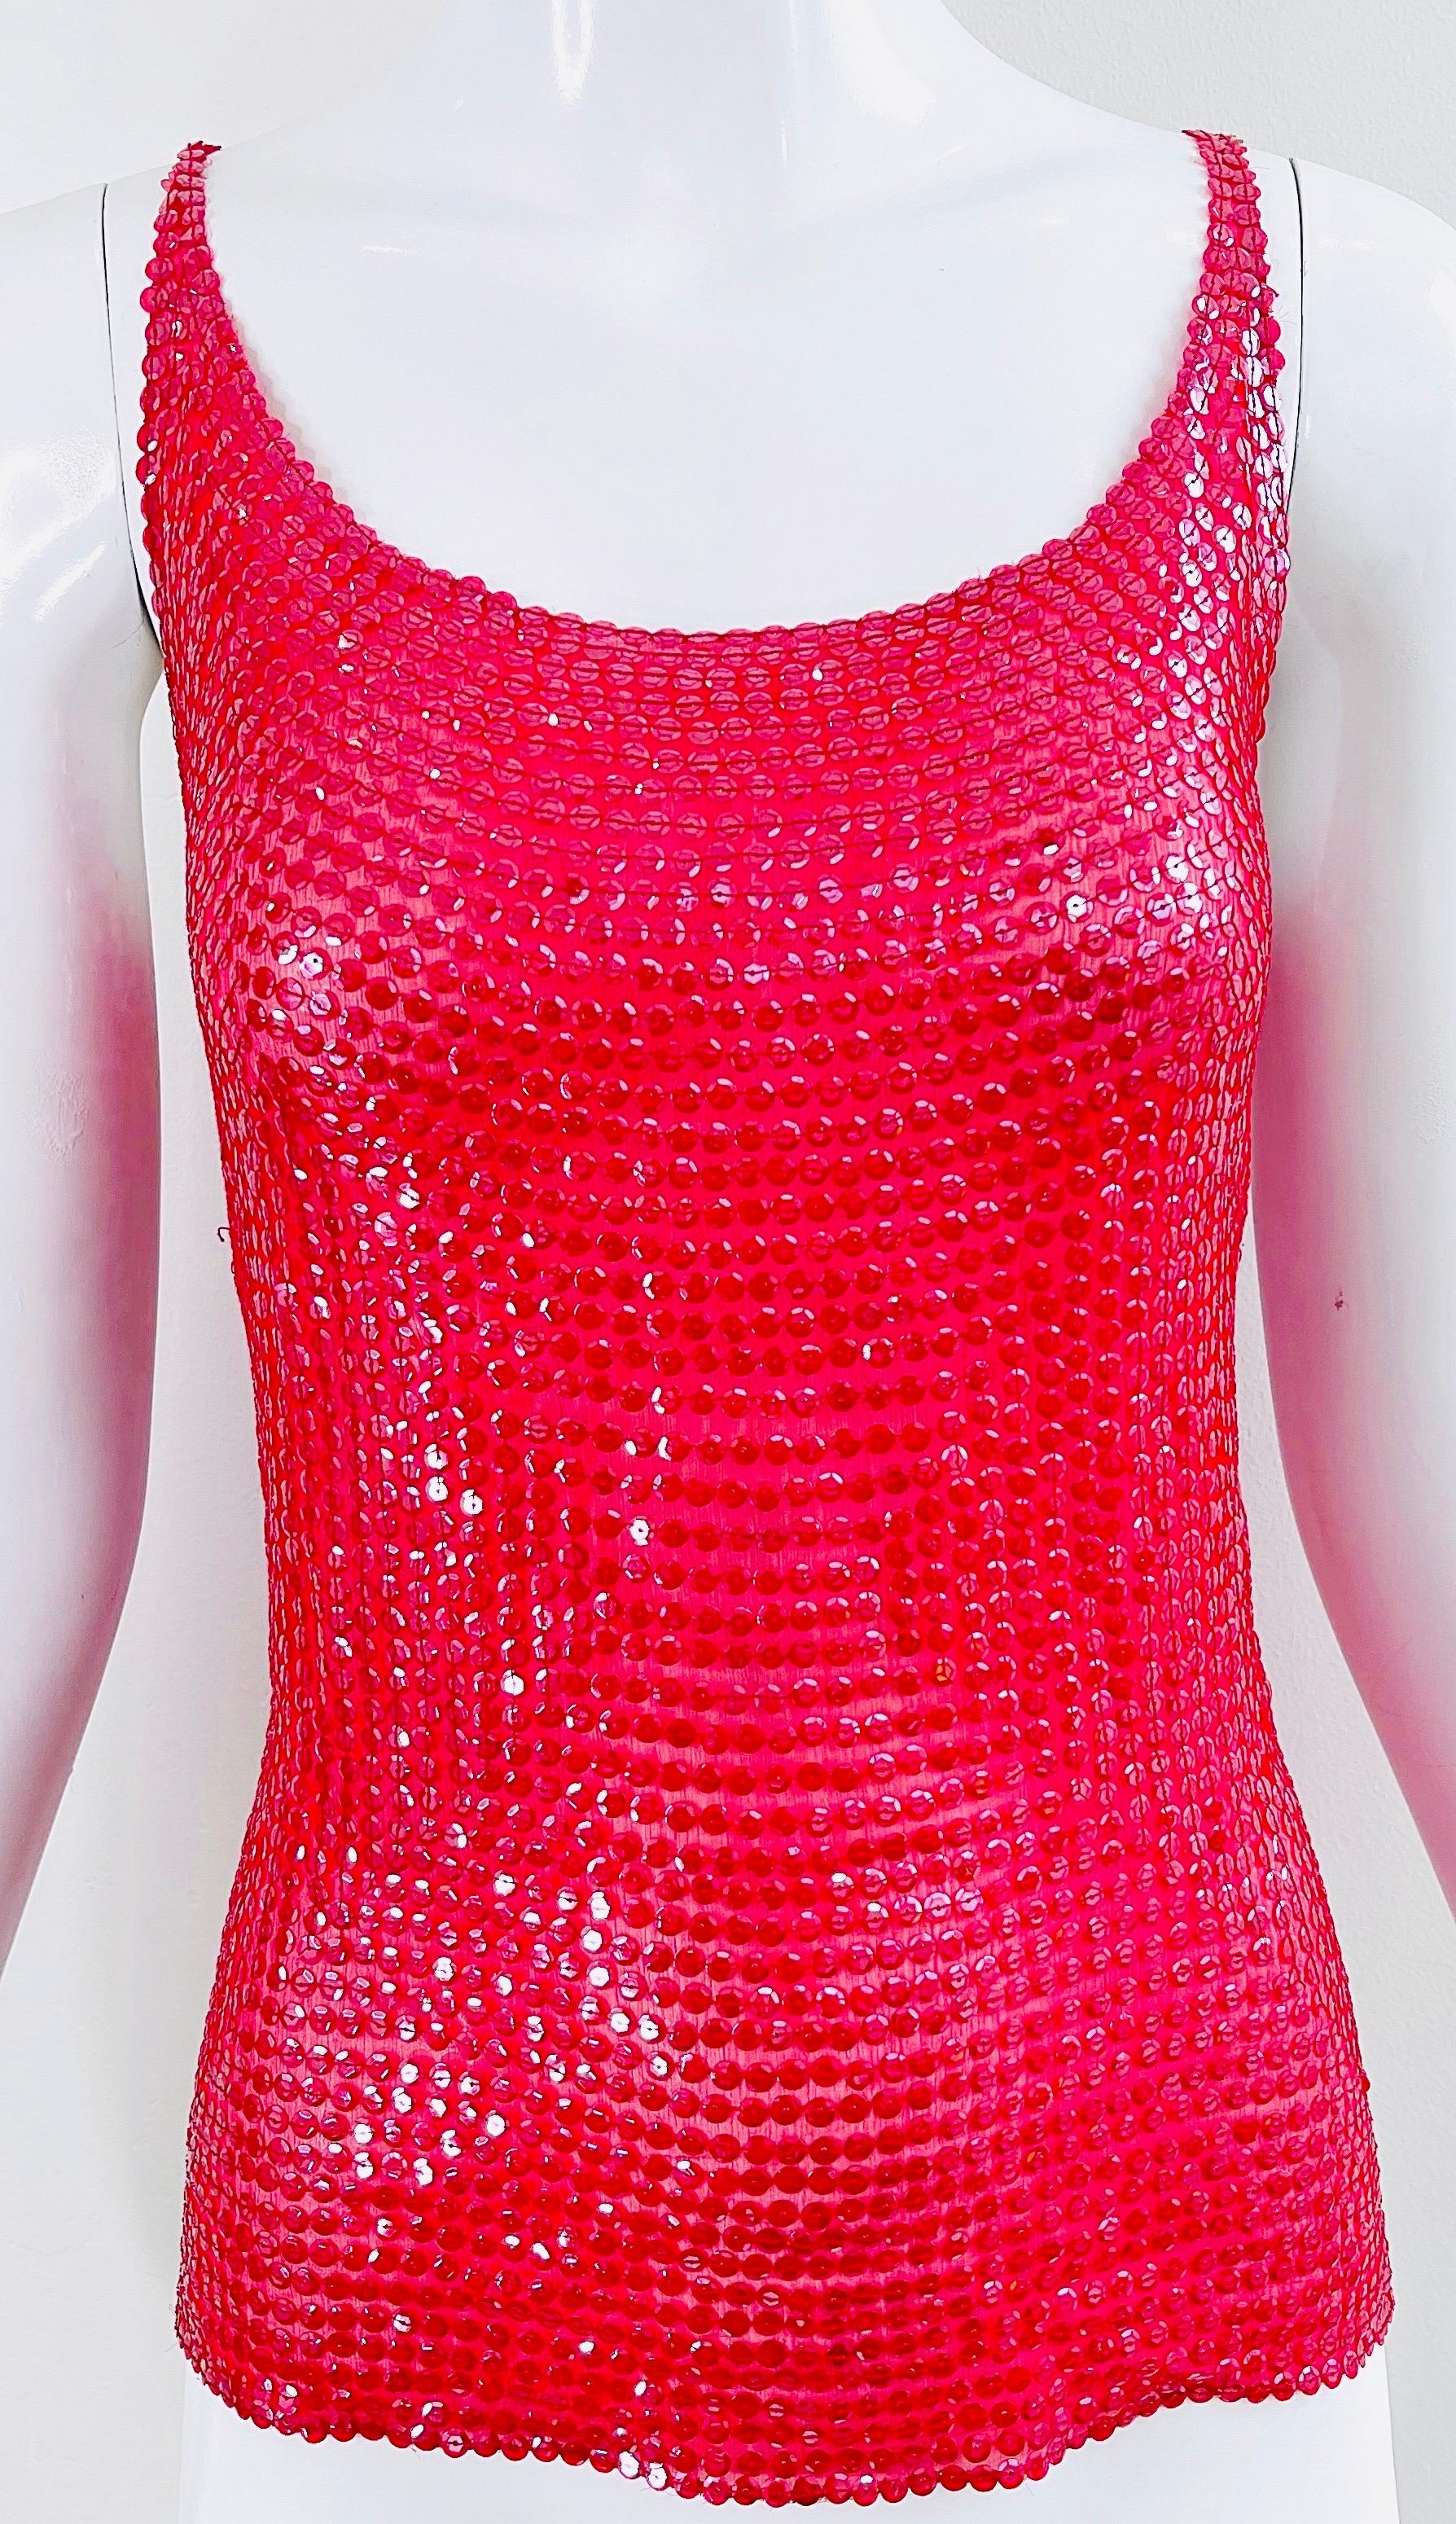 Halston 1970s Lipstick Red Silk Chiffon Fully Sequin Vintage 70s Sleeveless Top For Sale 8